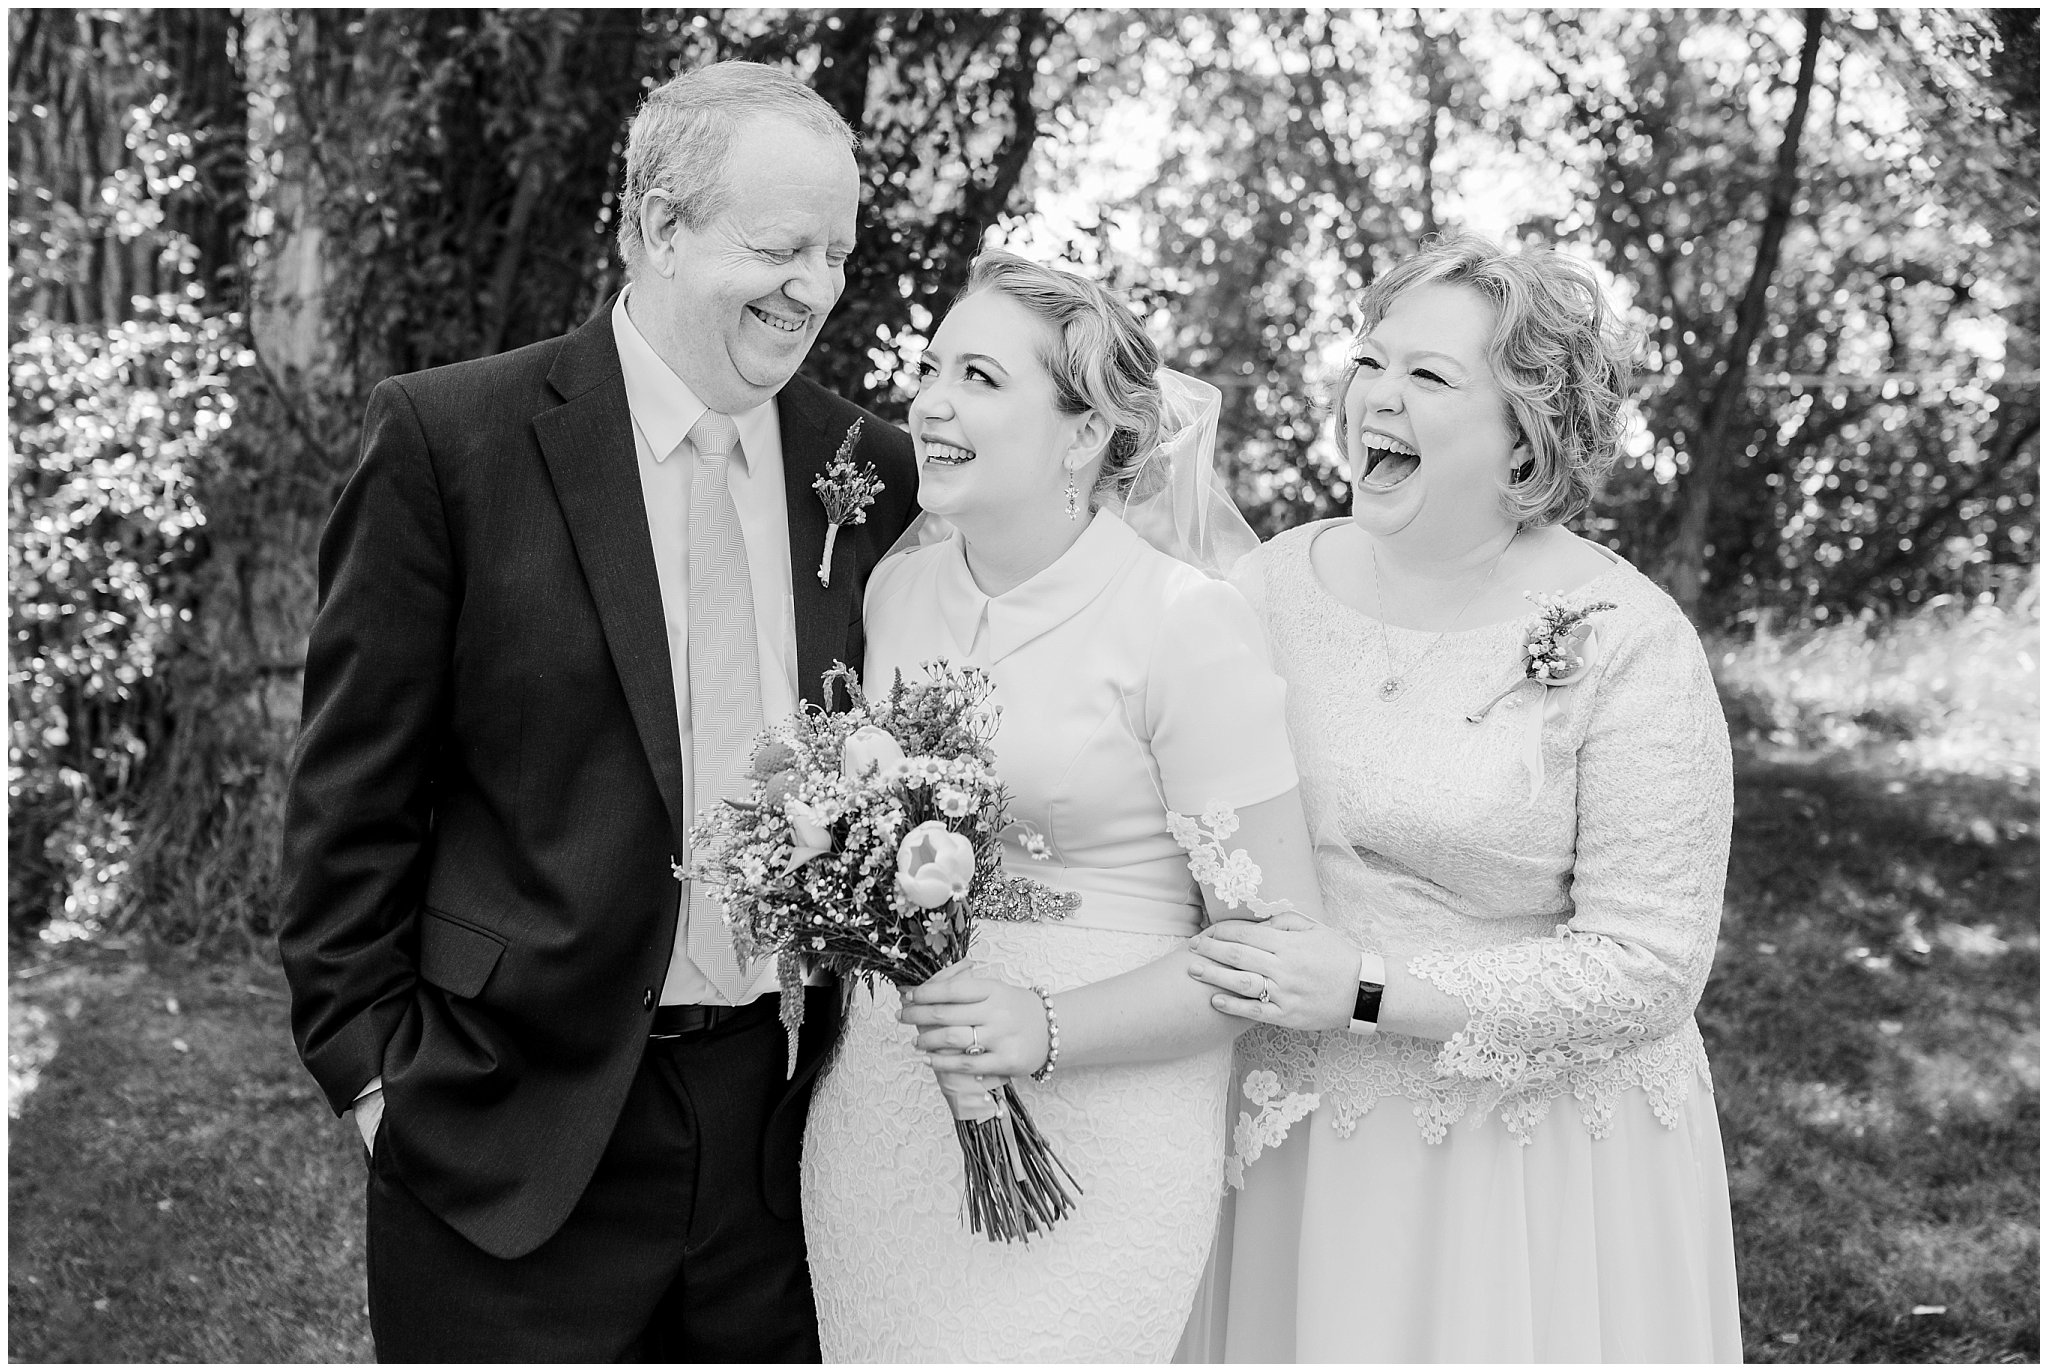 Family formal photos candid and formal | Fountain View Event Venue and Bountiful Temple Wedding | Jessie and Dallin Photography